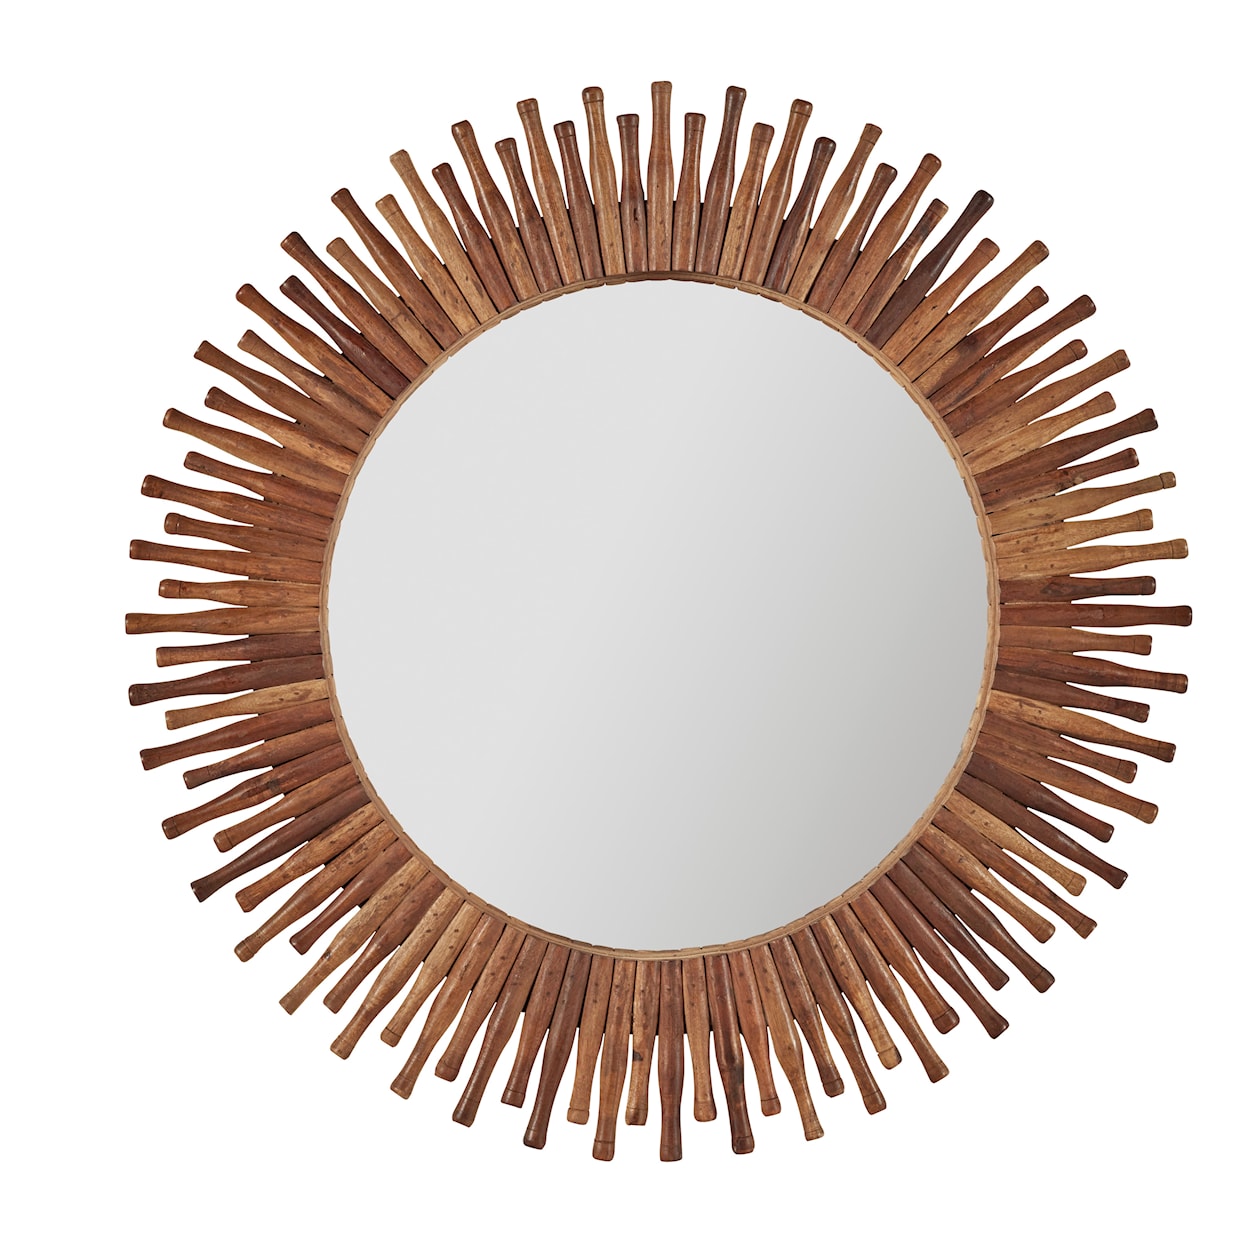 BOBO Intriguing Objects BOBO Intriguing Objects Small Wooden Roller Mirror